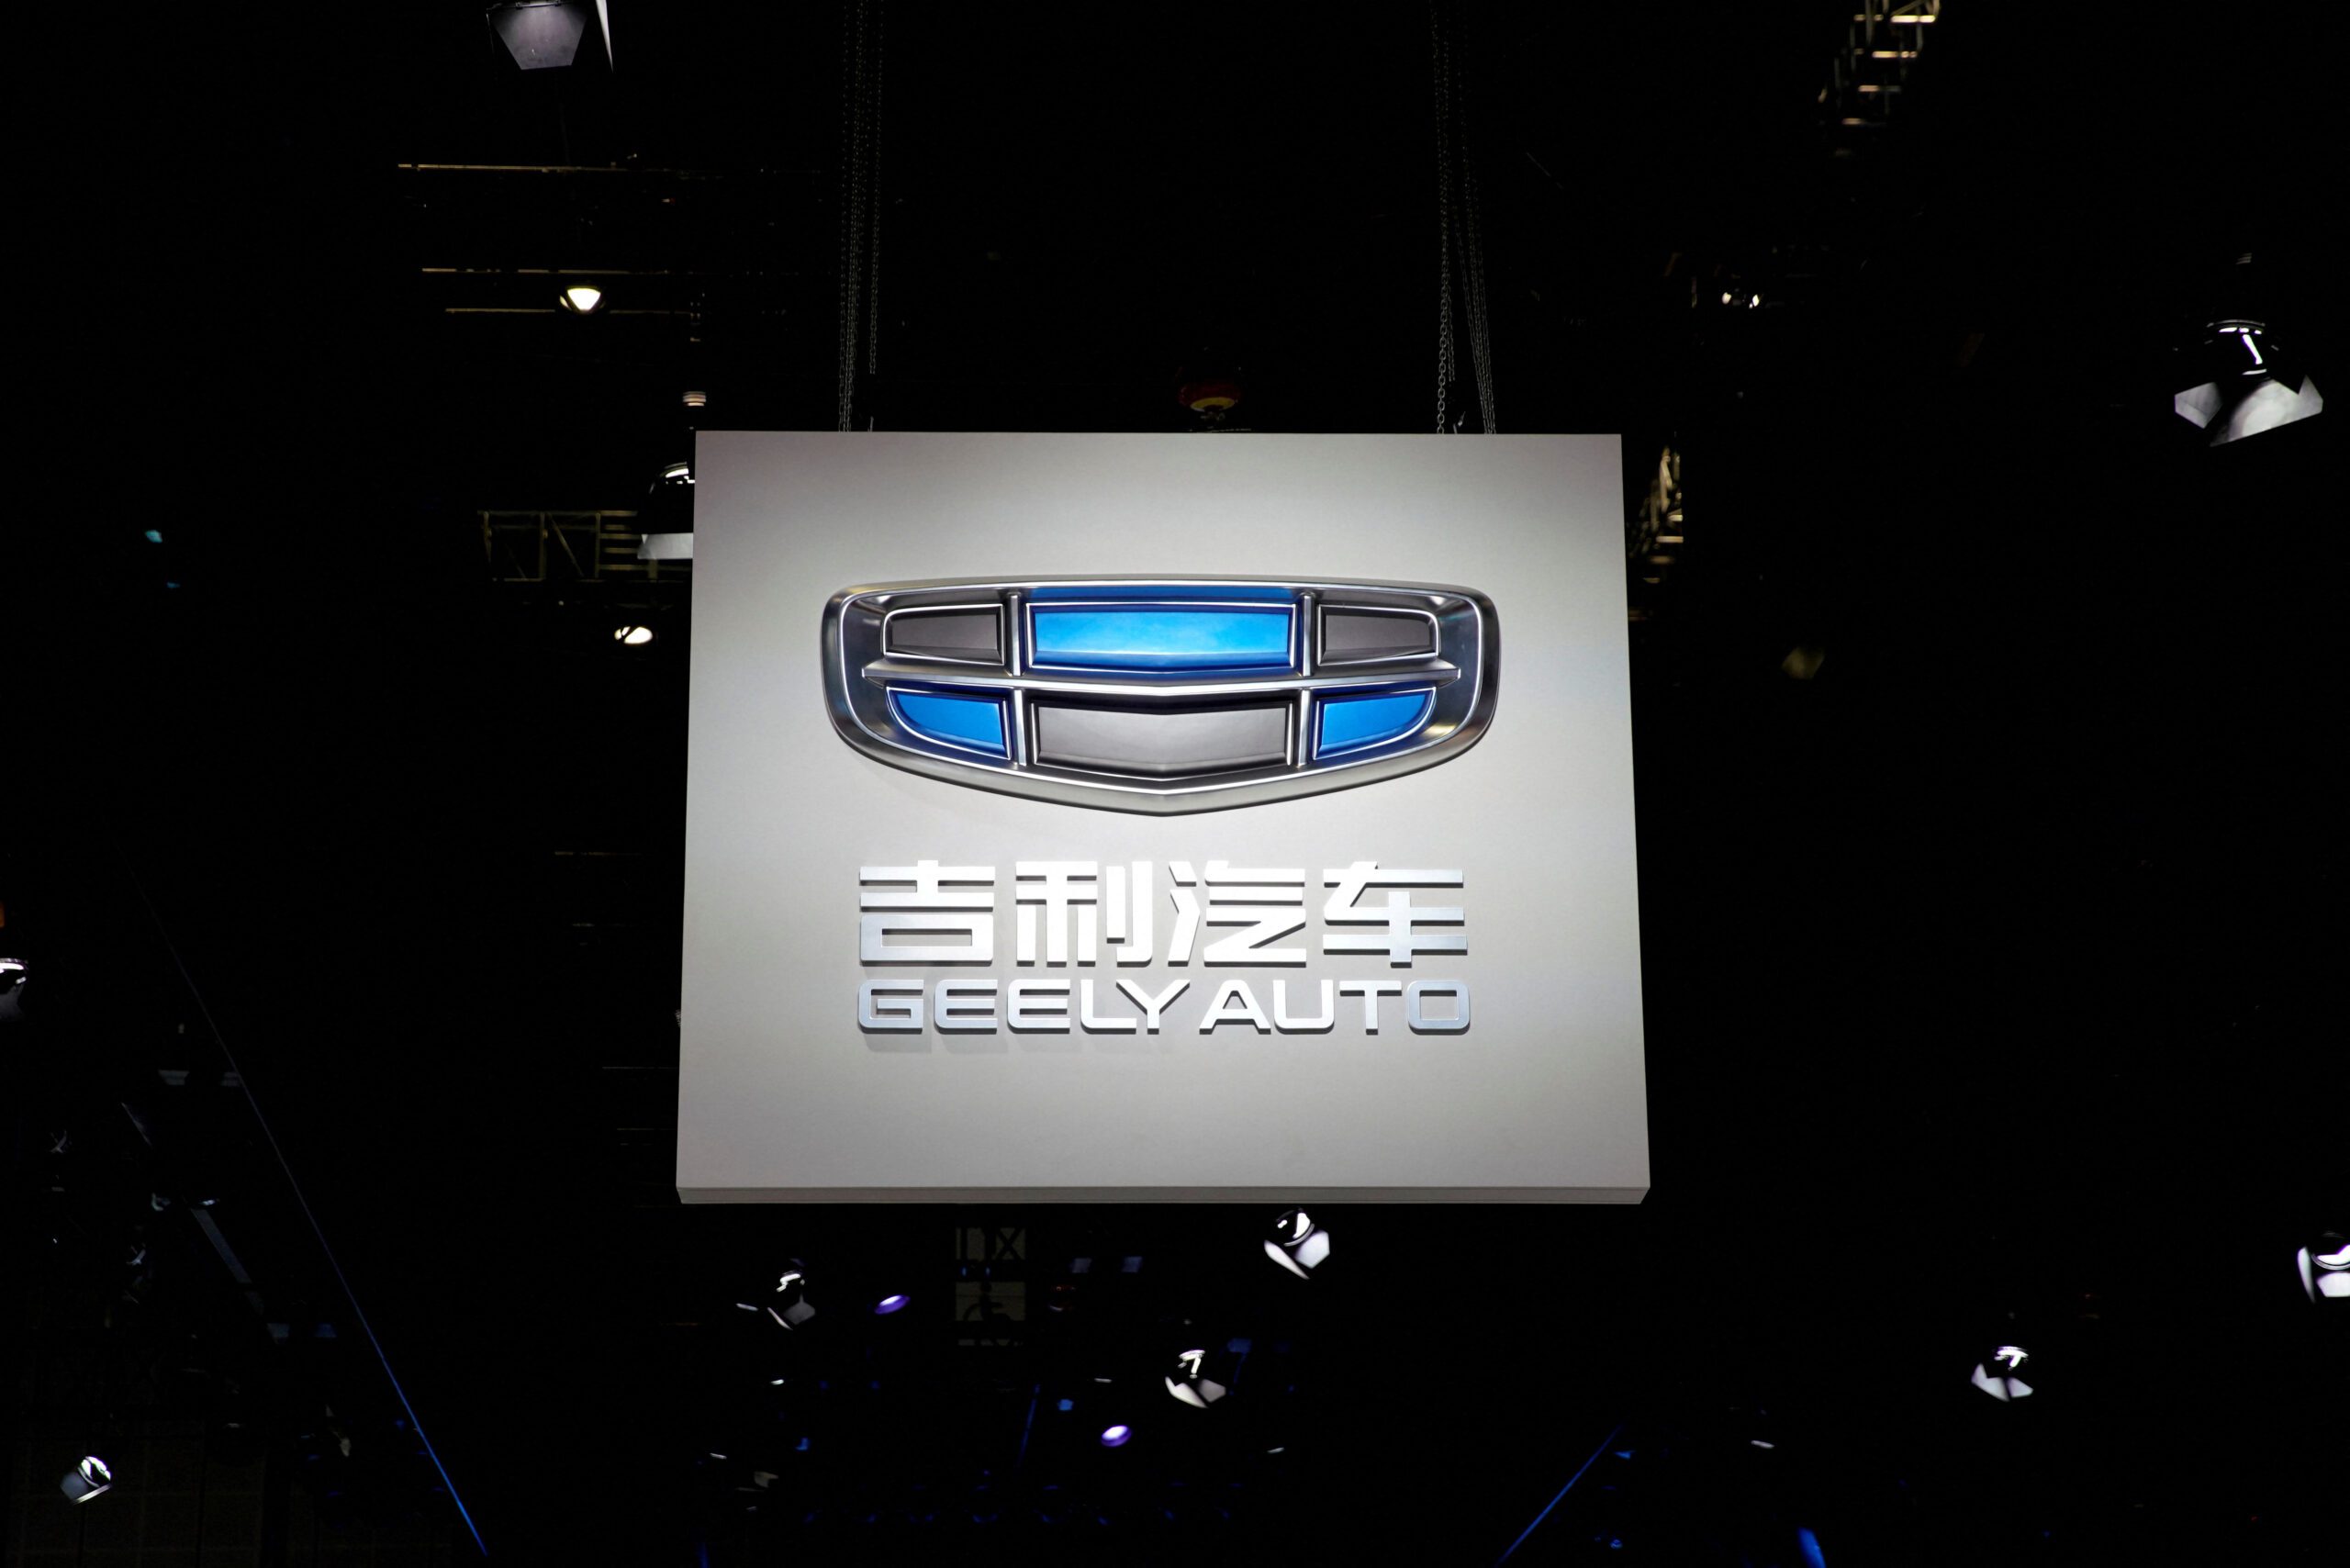 China's Geely planning entry into Thailand's EV market